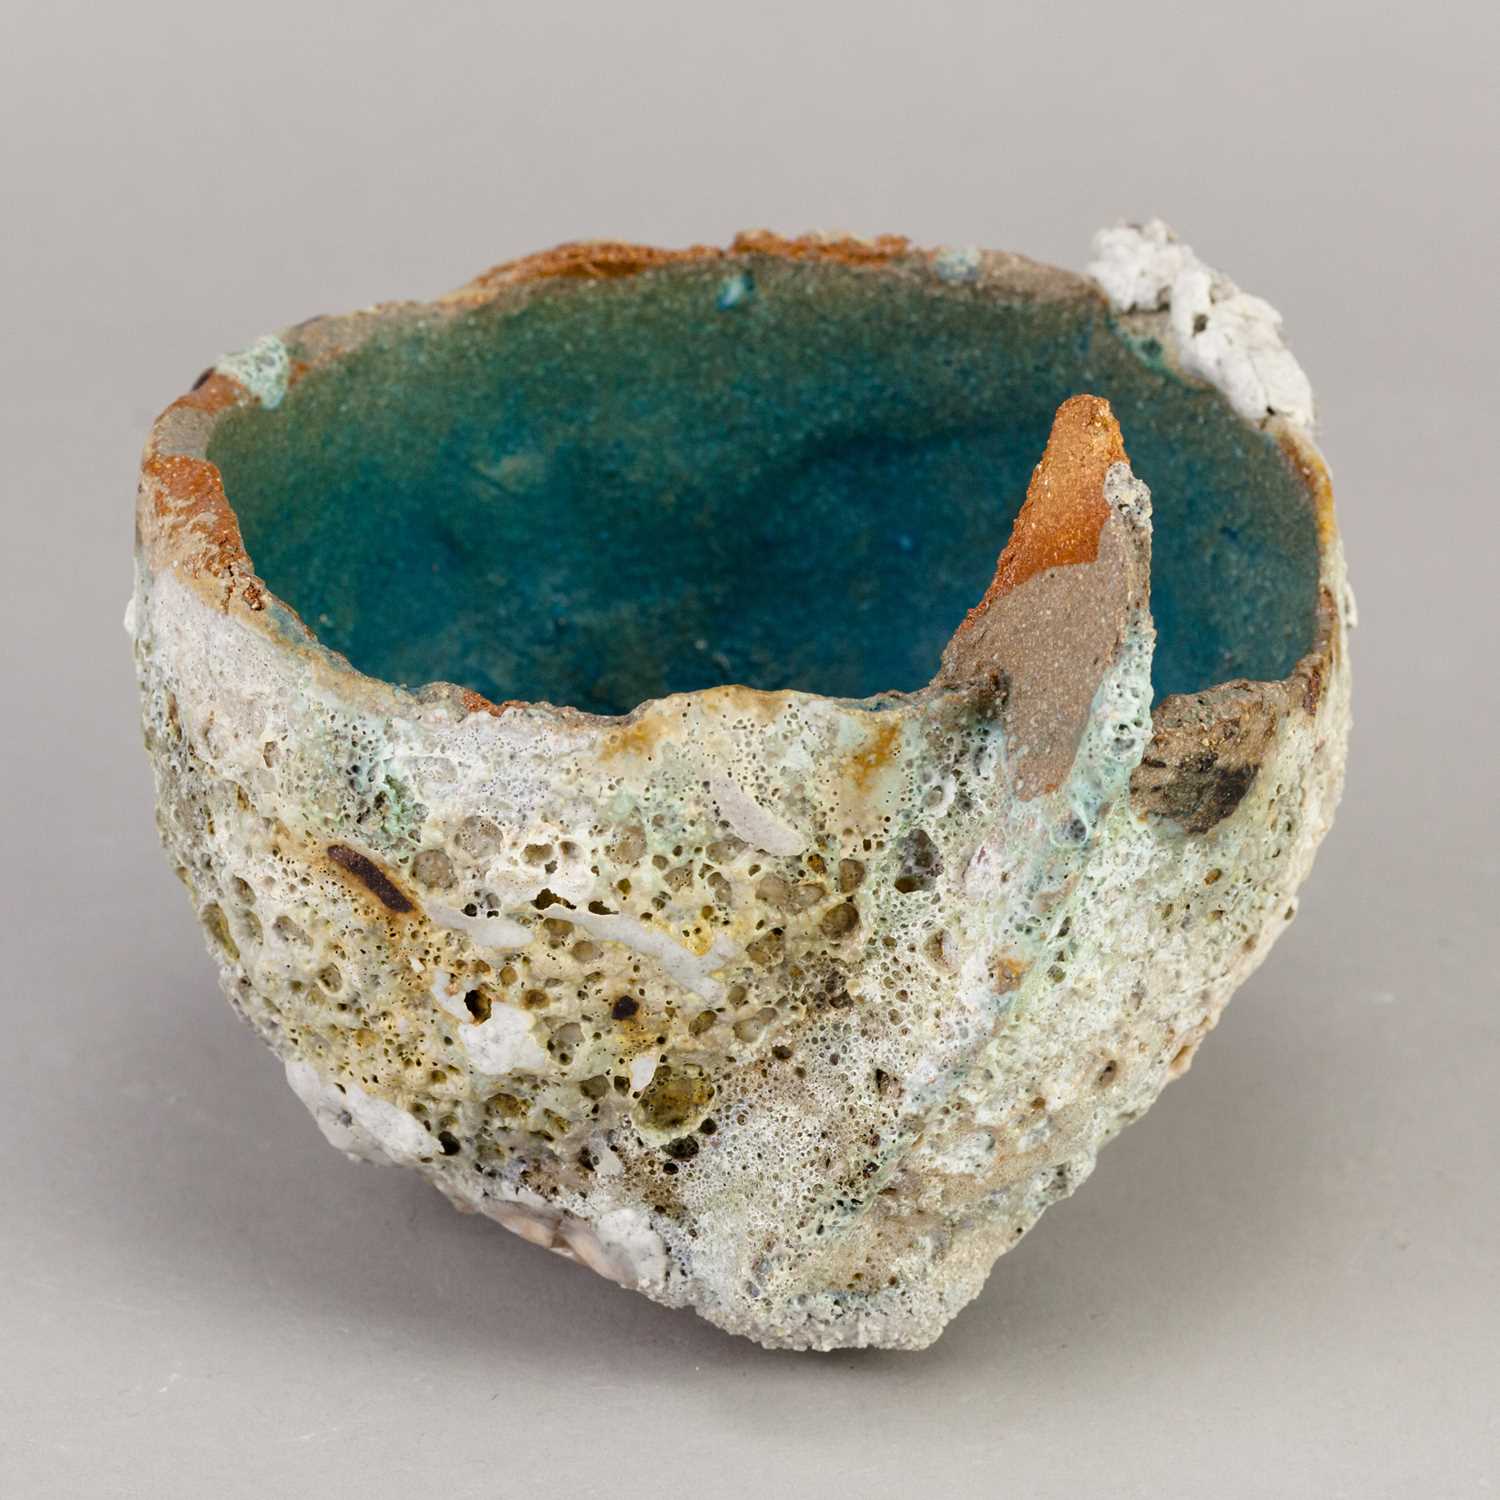 TAMSYN TREVORROW (born 1975); a small grogged stoneware sculptural blue rock pool bowl with one fin, - Image 2 of 5